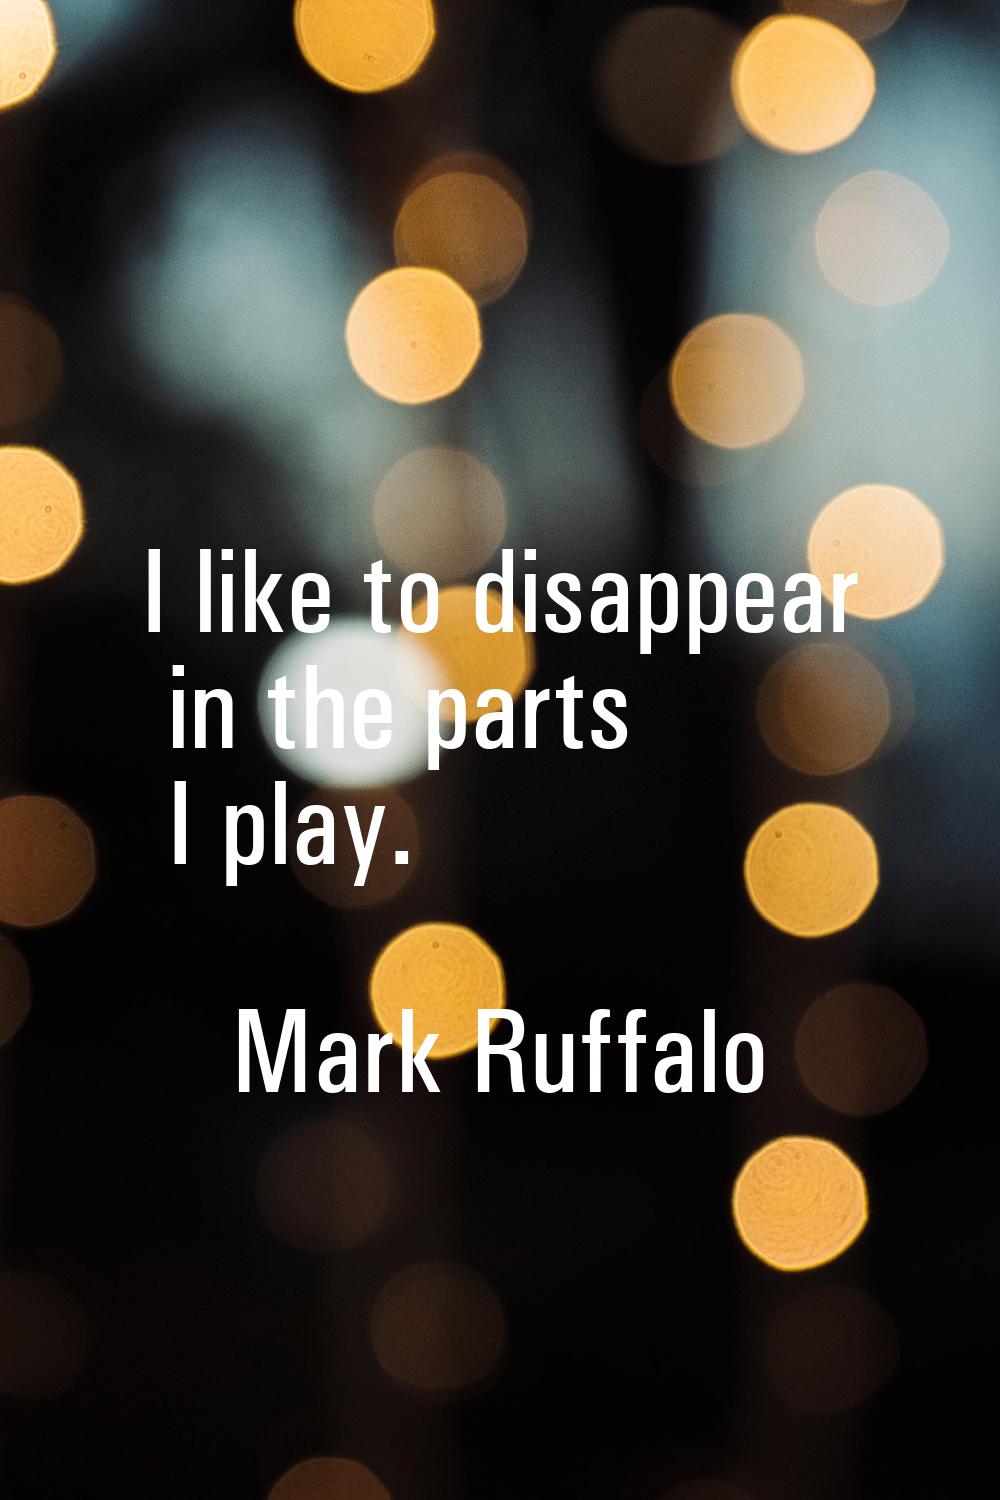 I like to disappear in the parts I play.